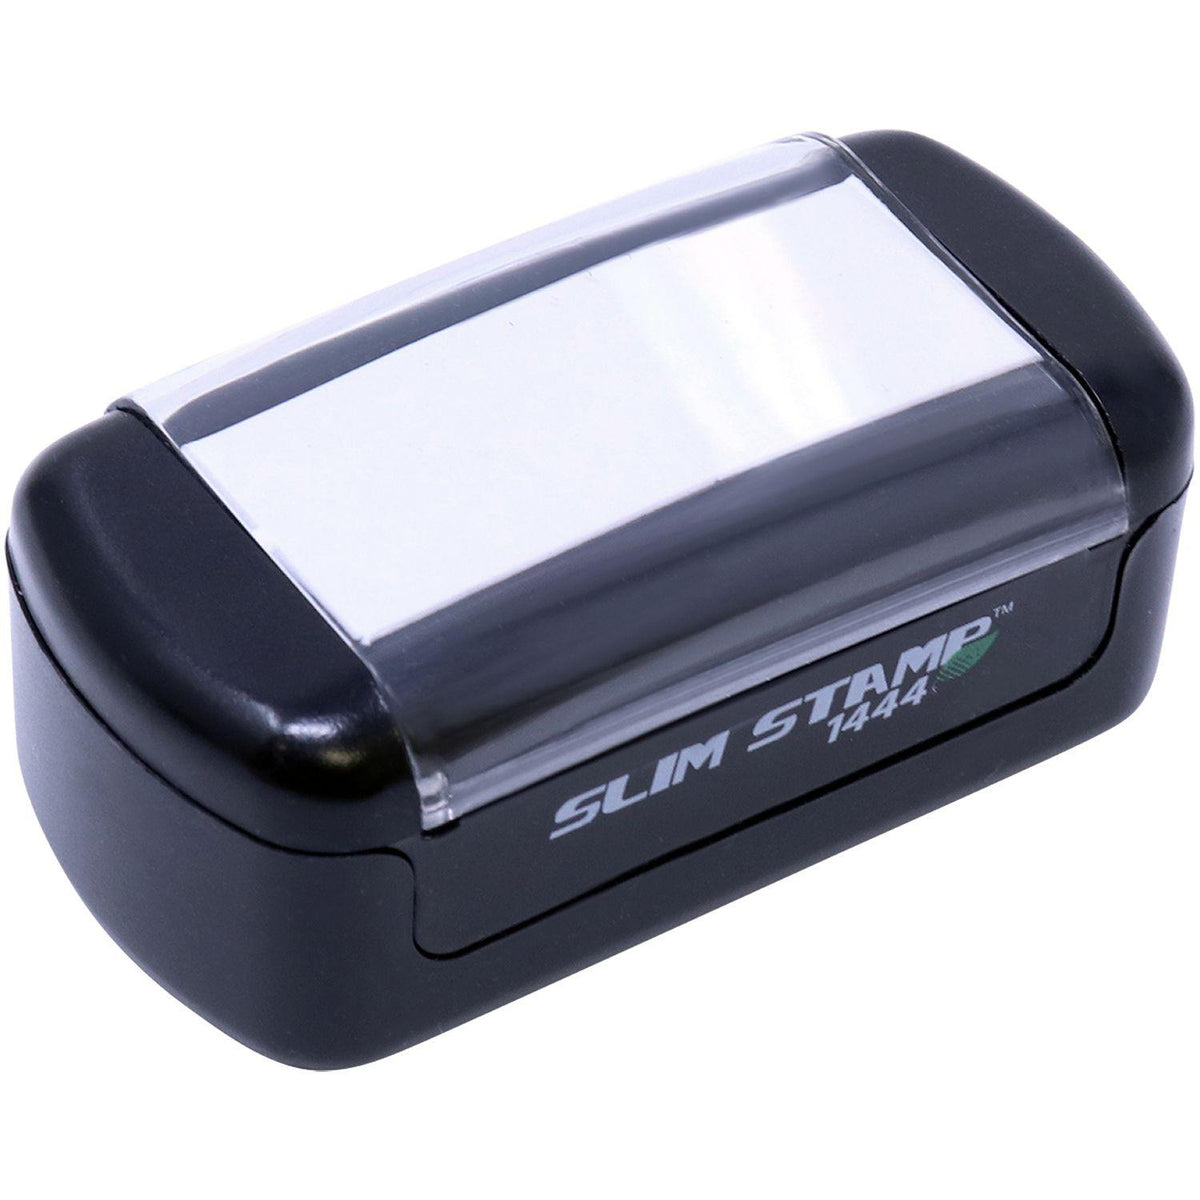 Top Down View of Slim Pre-Inked Insurance Verified Stamp